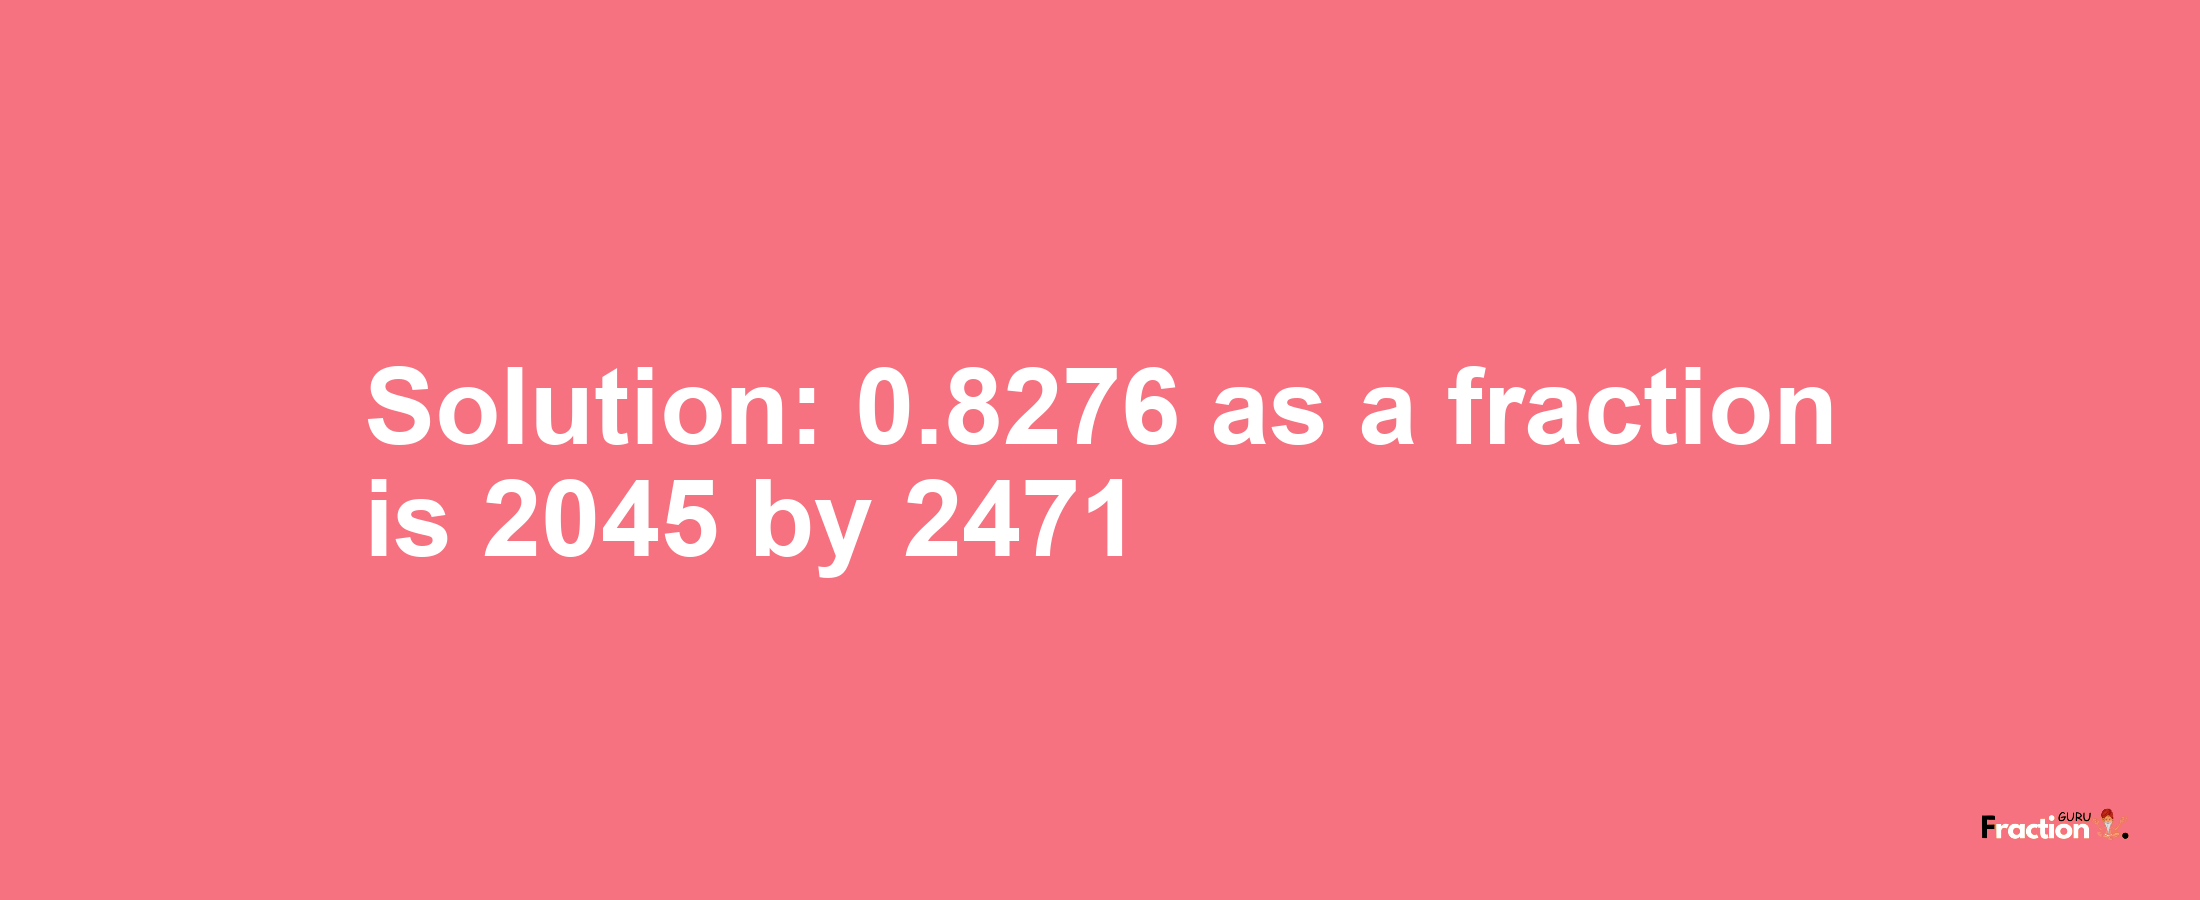 Solution:0.8276 as a fraction is 2045/2471